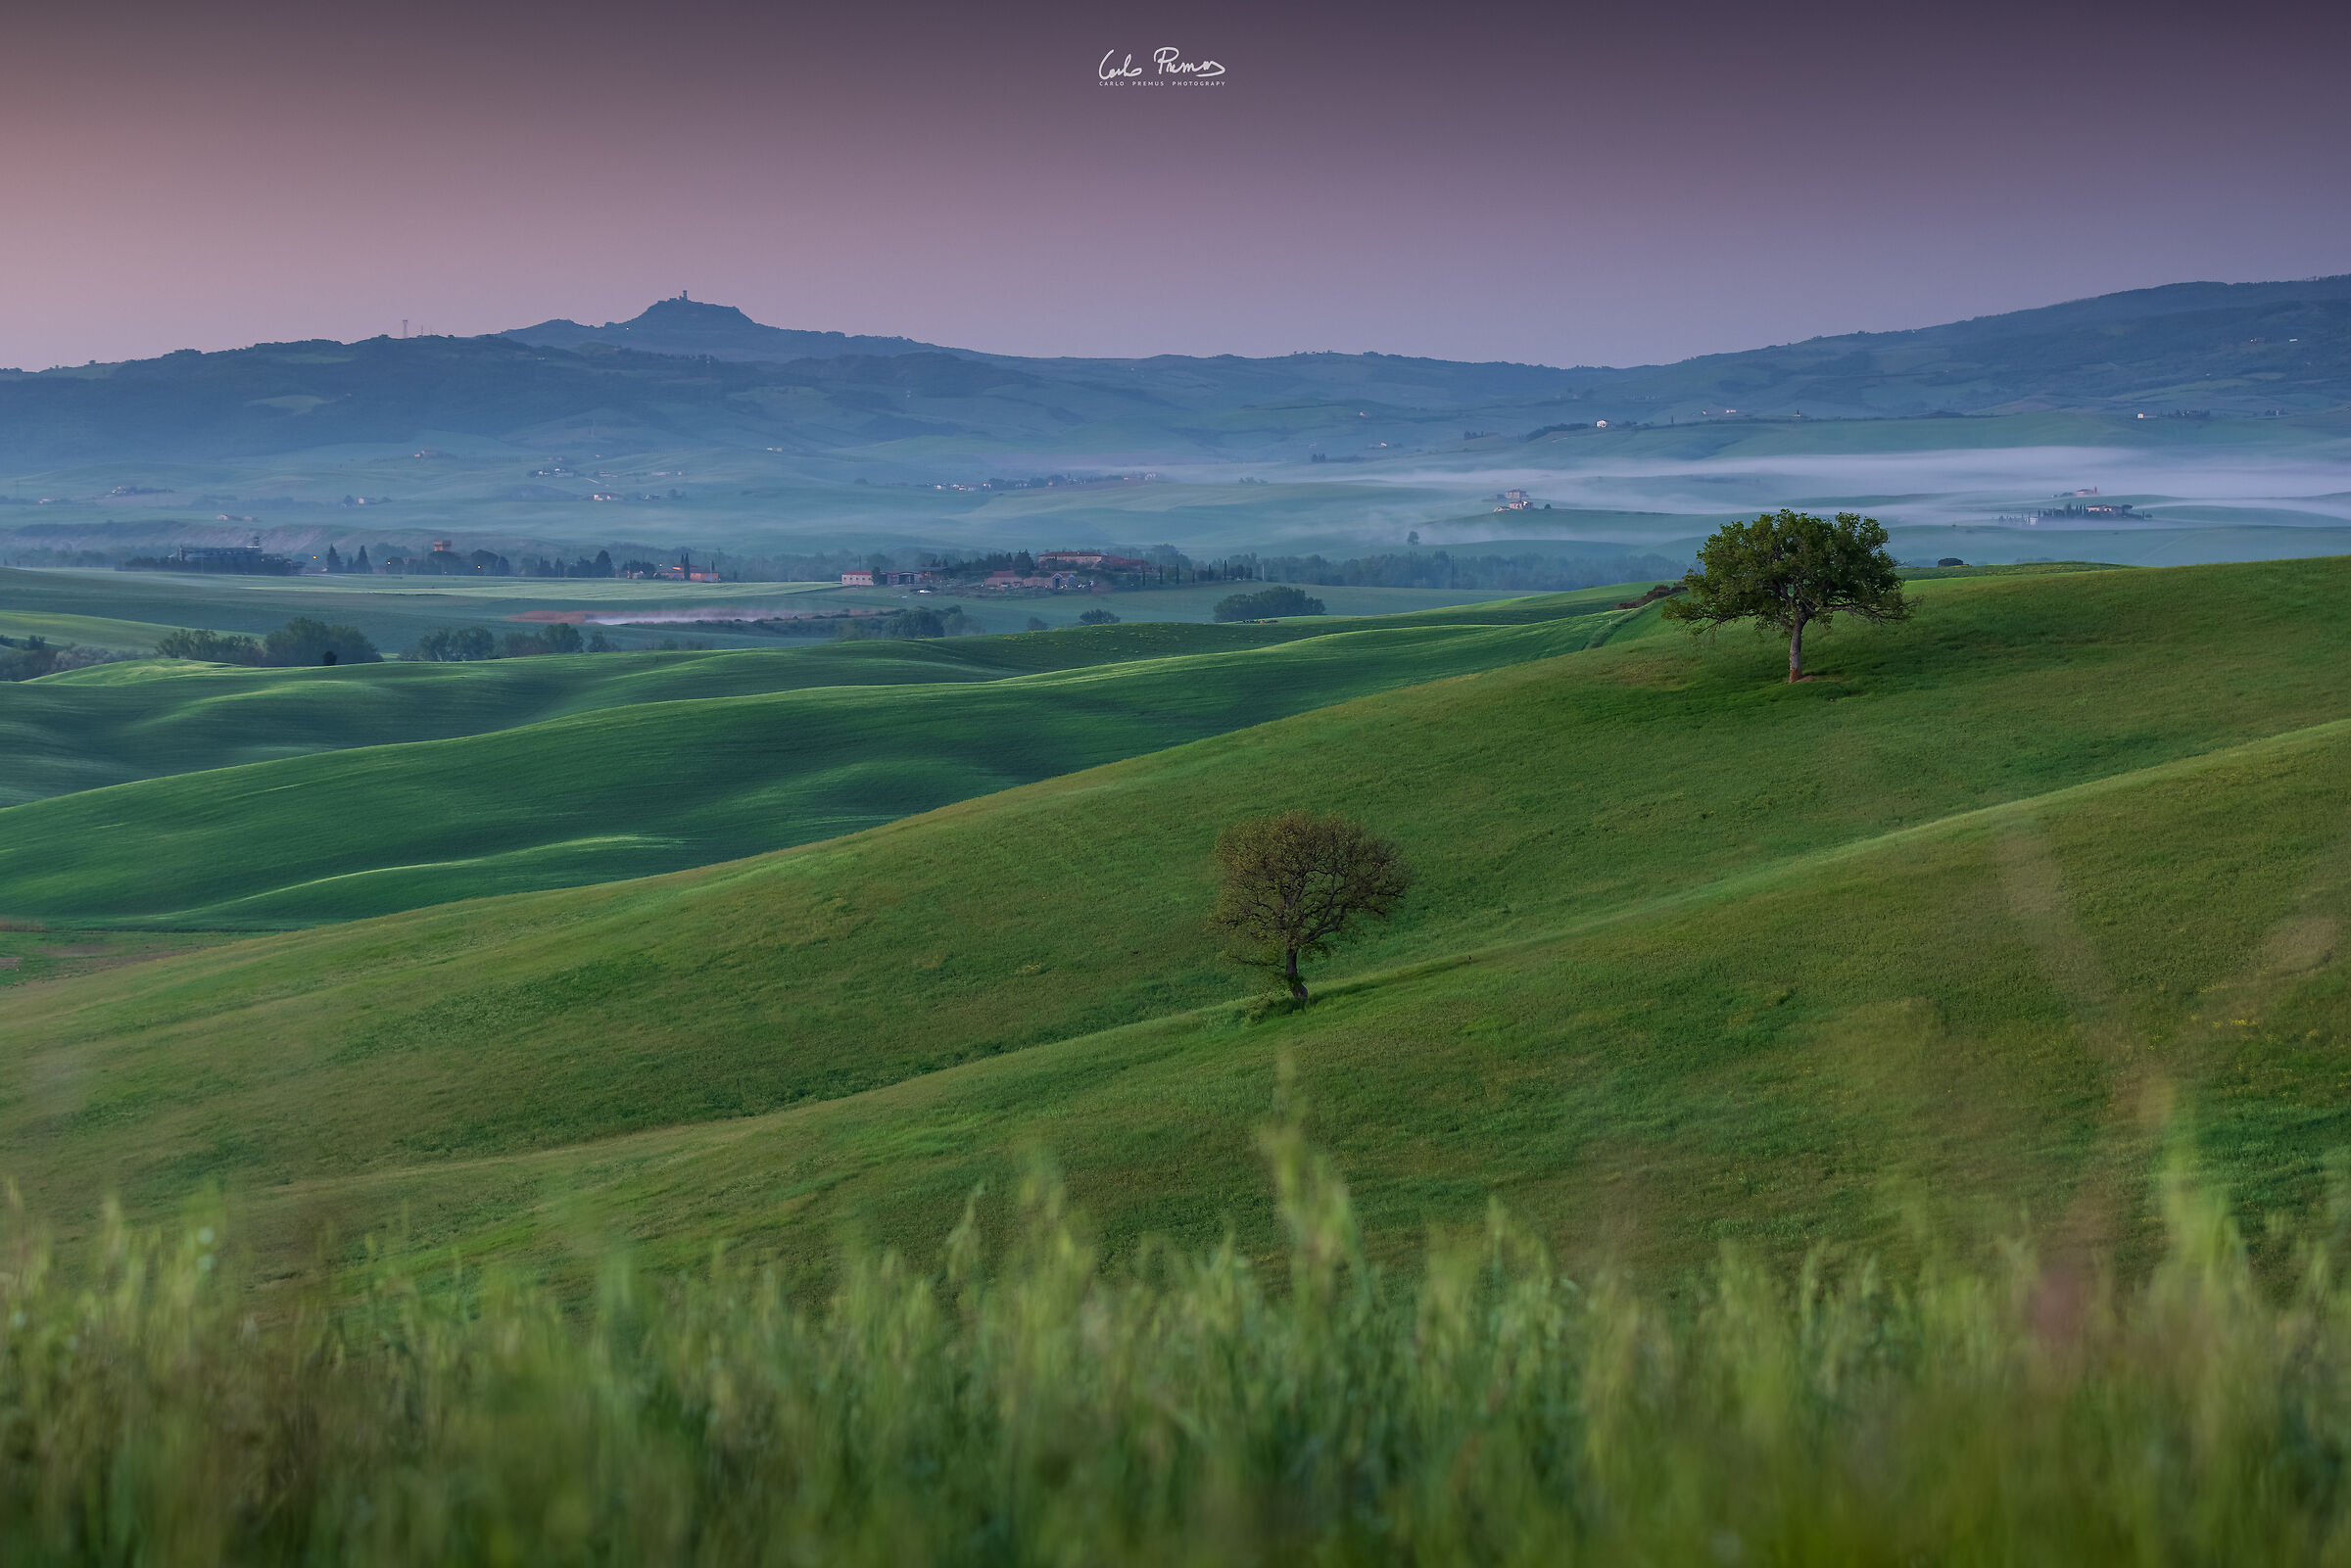 The magic of the Val d'Orcia...